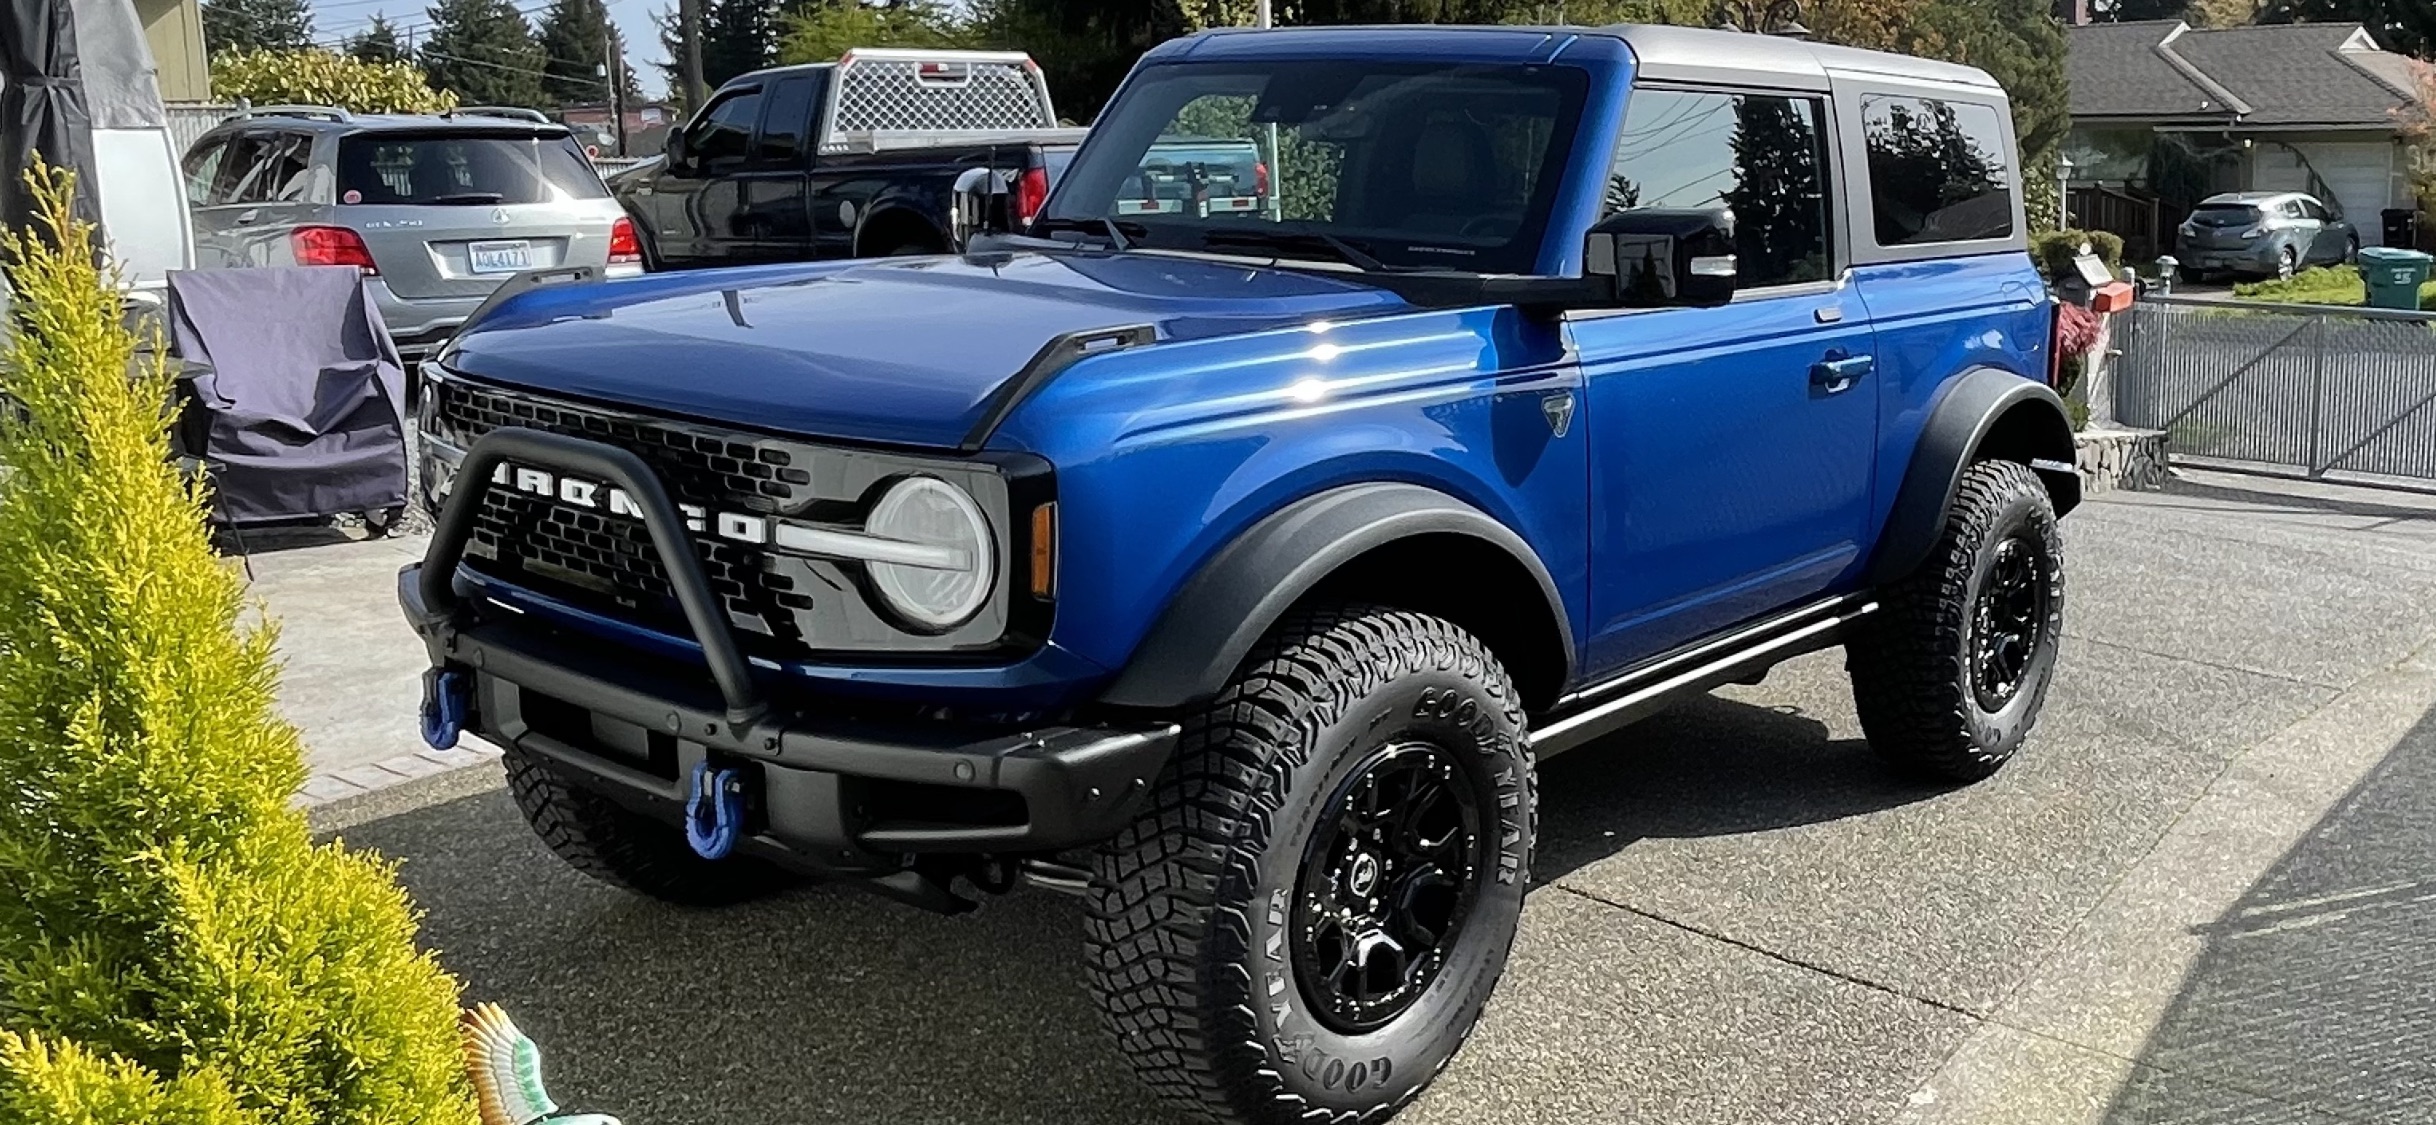 Ford Bronco Only 4471 First Editions ever made! C7AABFA0-306C-4B3C-B5A1-5F2BD4C4D4A6